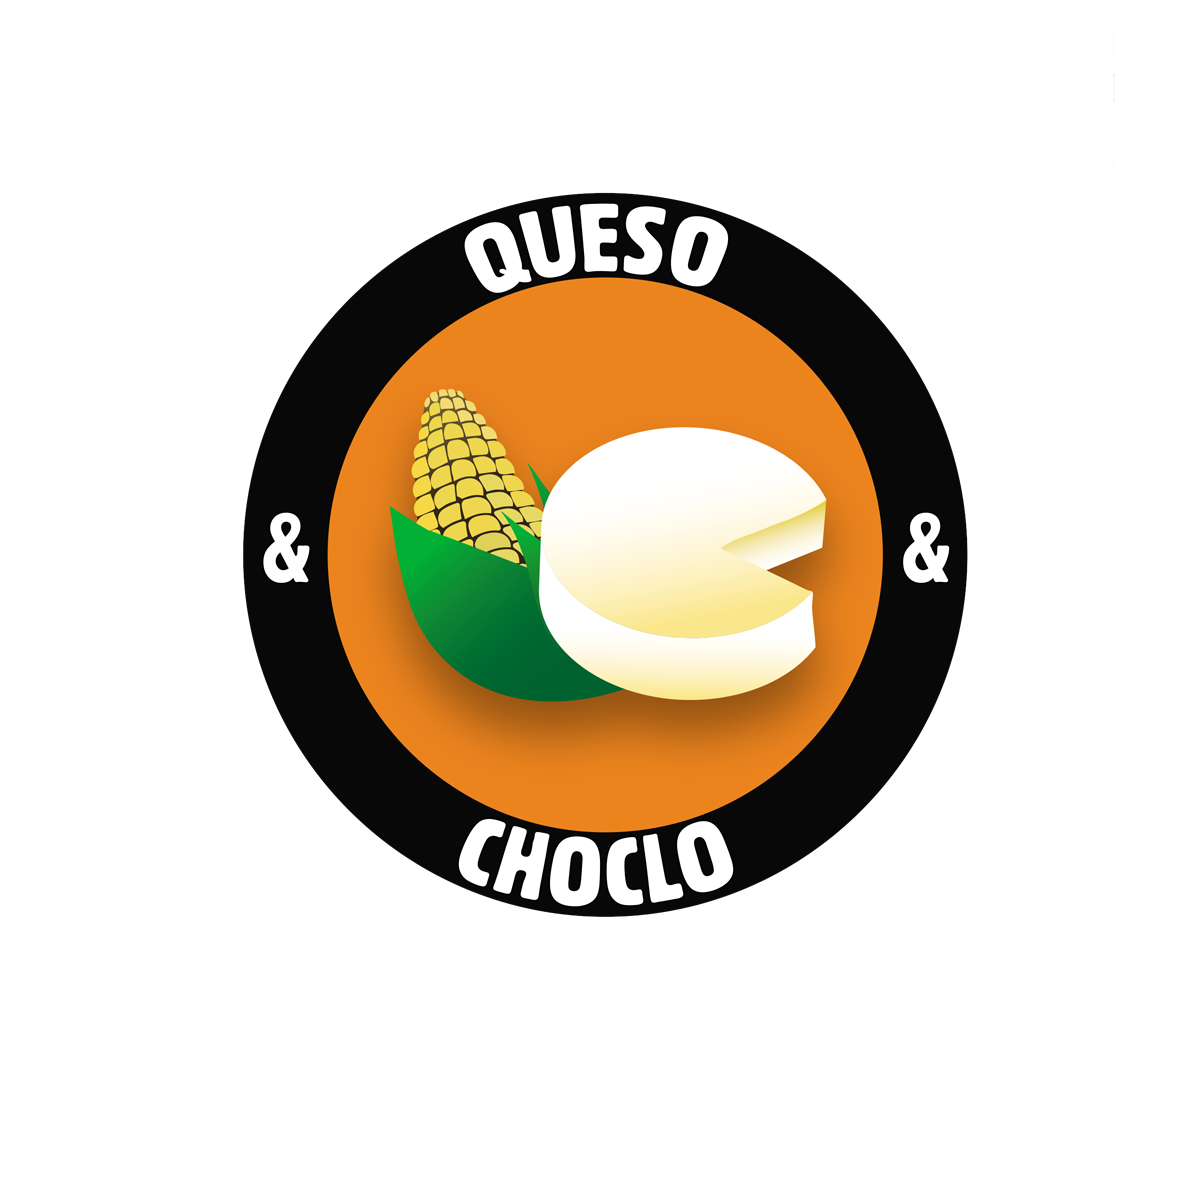 Delivery Queso and Choclo